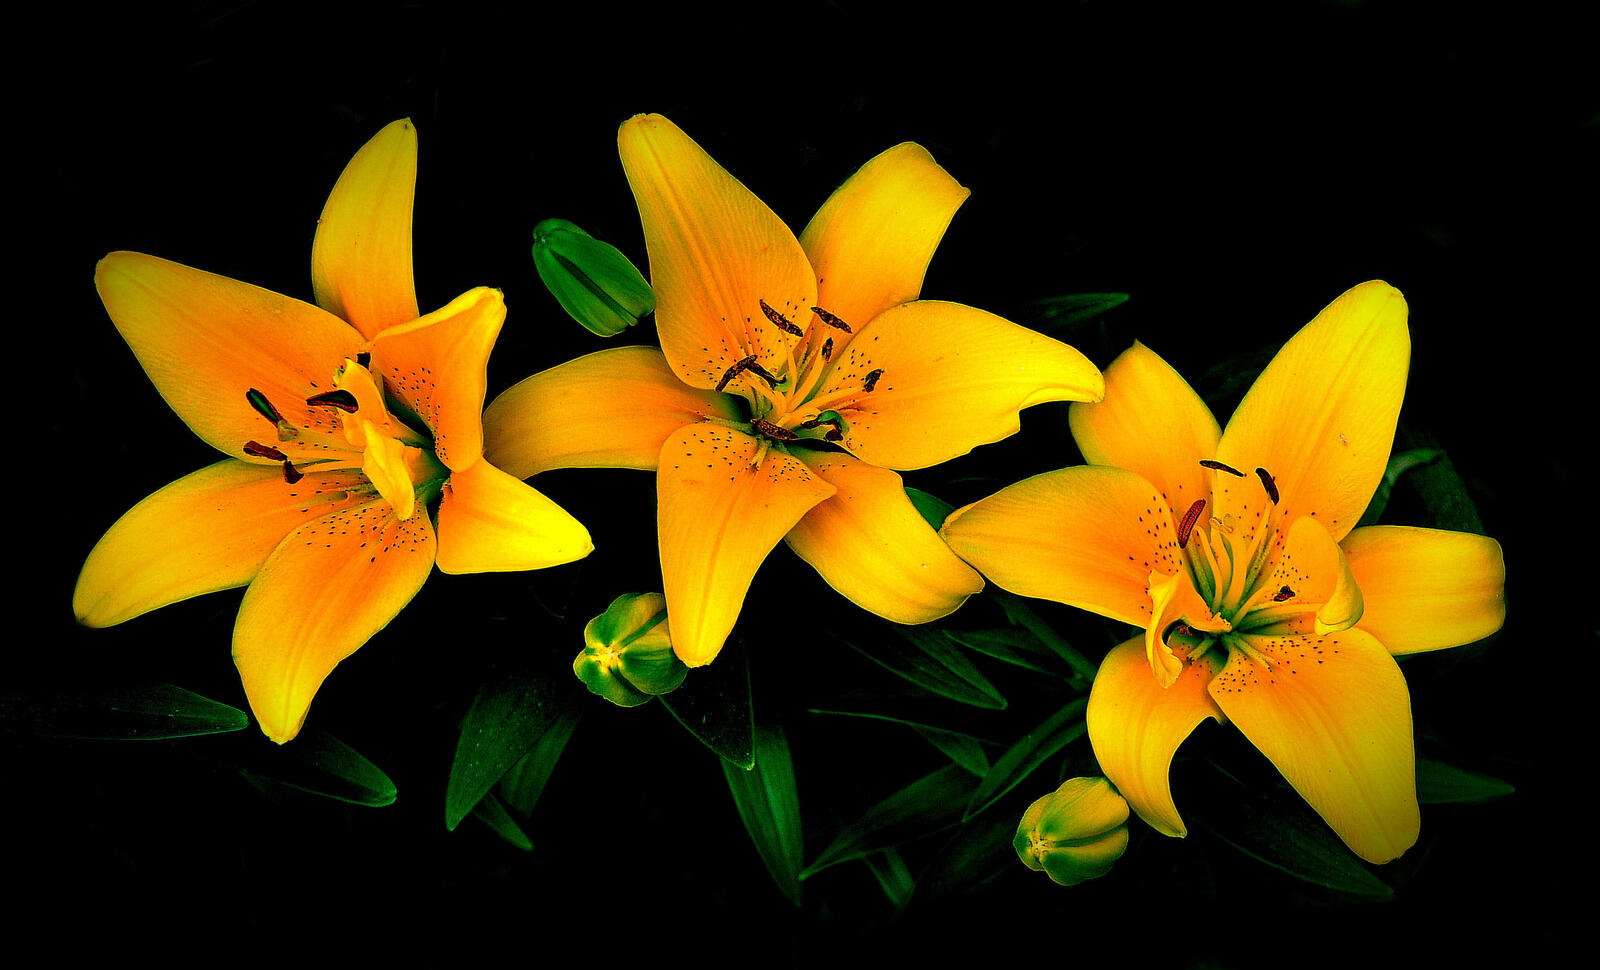 Wallpapers lilies flower yellow flowers on the desktop